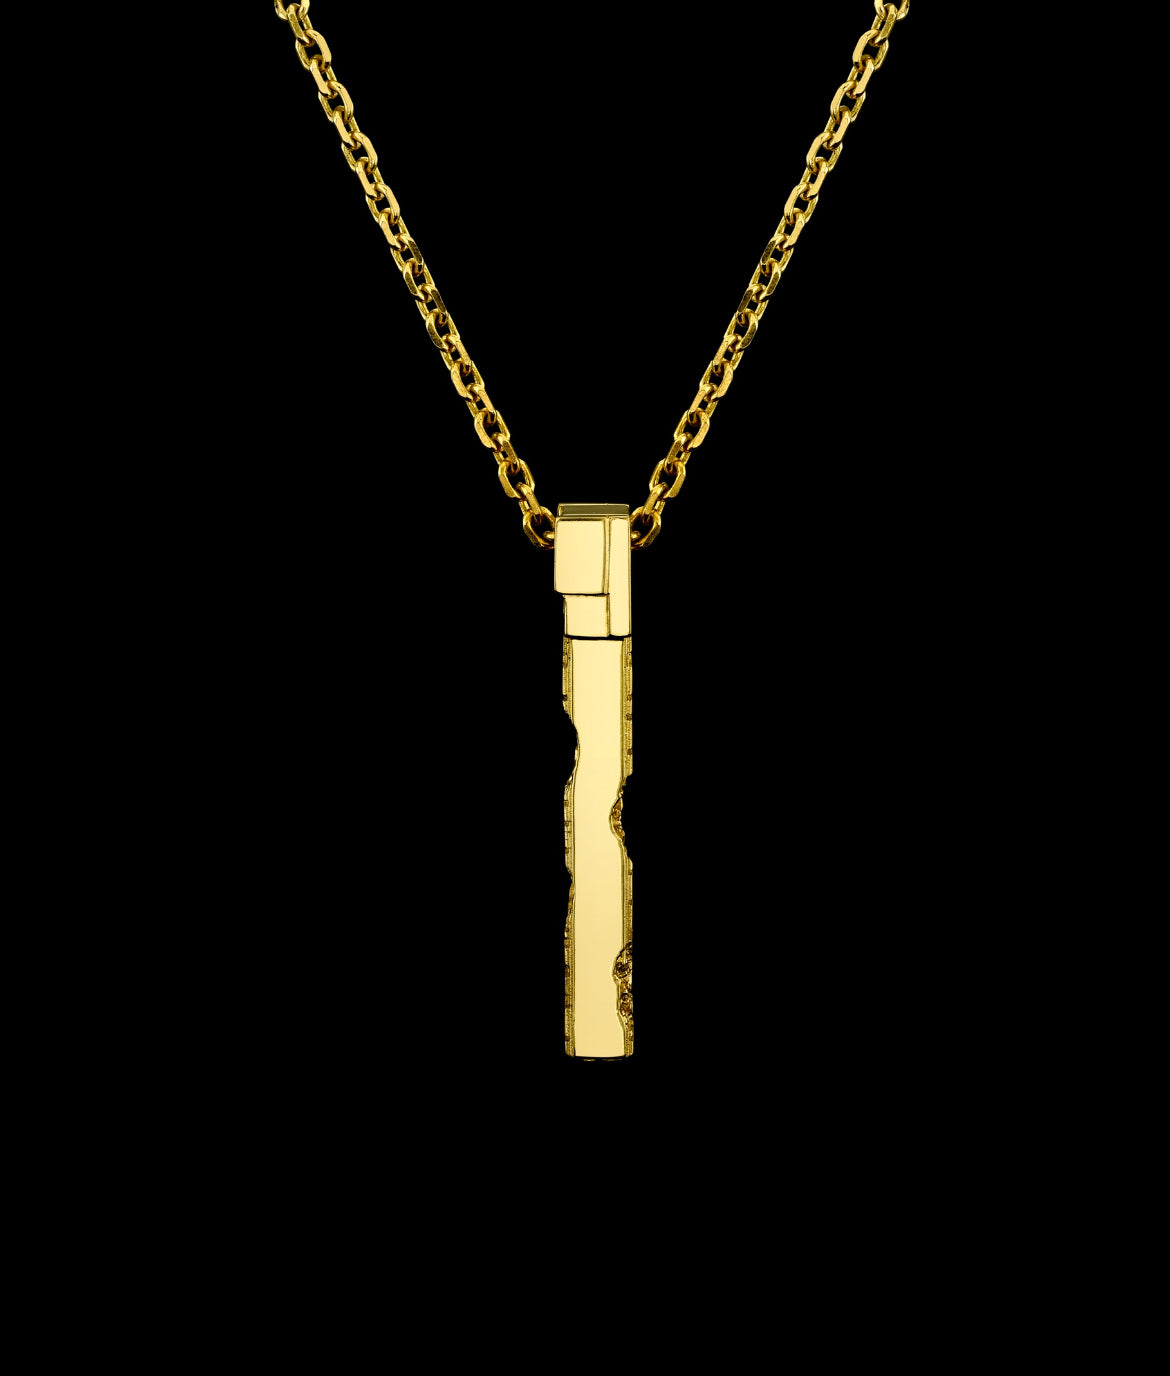 Eroded Architecture 18k Yellow Gold Large Bar Necklace with round brilliant diamonds.  Edition of 50.